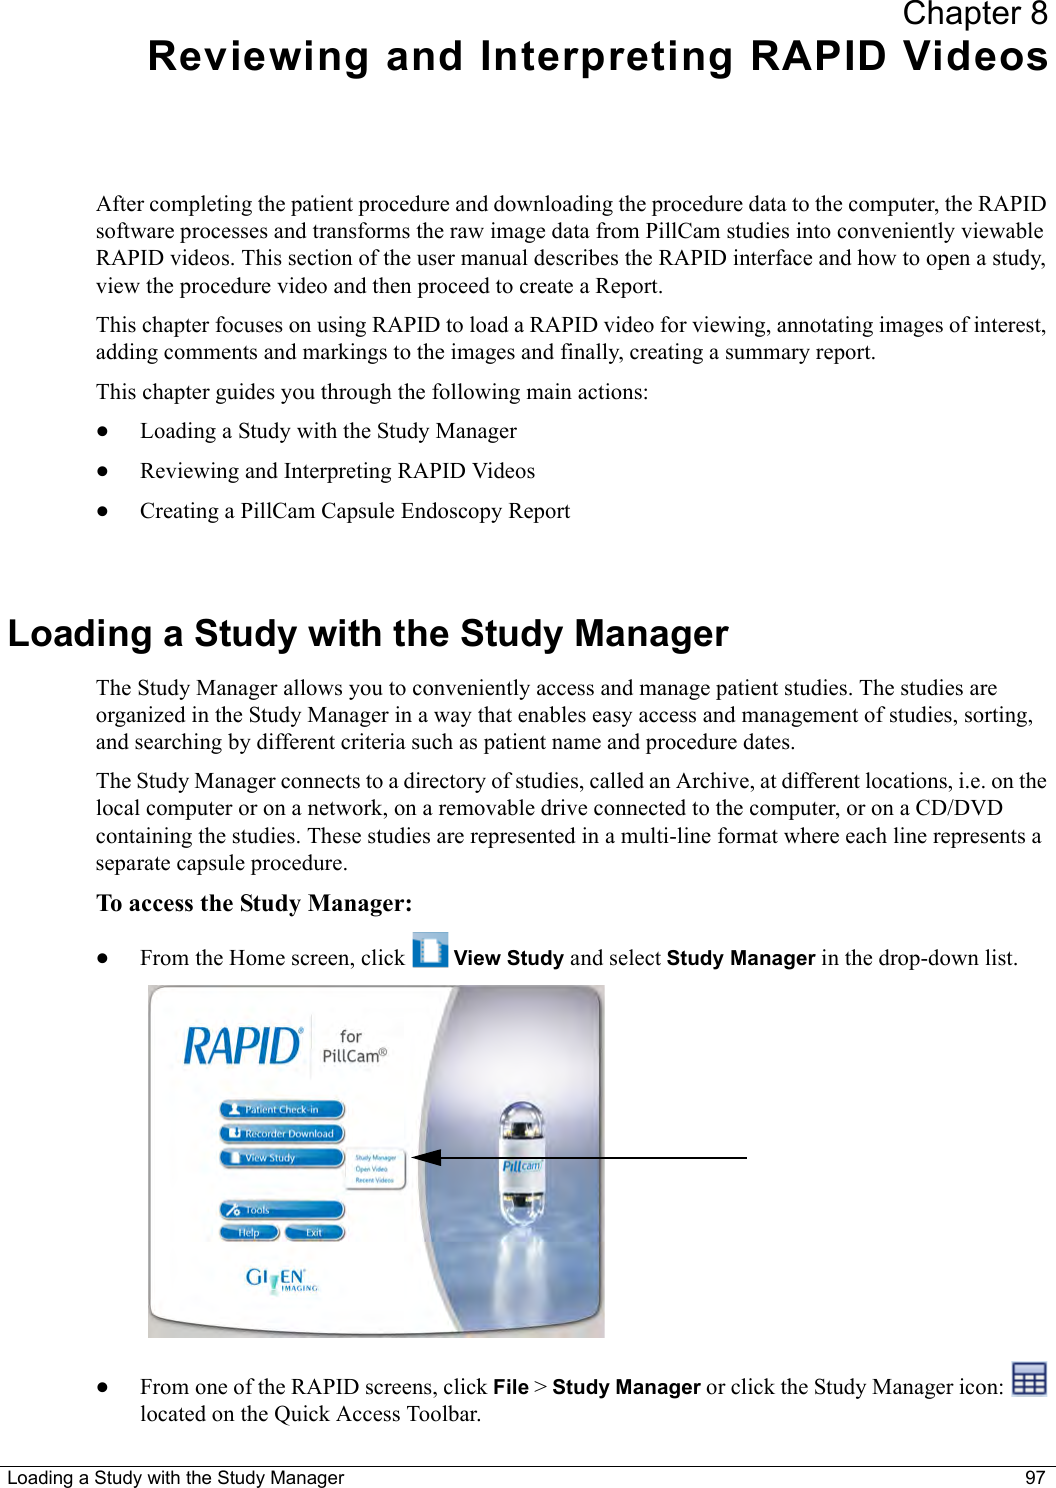 Loading a Study with the Study Manager 97Chapter 8Reviewing and Interpreting RAPID VideosAfter completing the patient procedure and downloading the procedure data to the computer, the RAPID software processes and transforms the raw image data from PillCam studies into conveniently viewable RAPID videos. This section of the user manual describes the RAPID interface and how to open a study, view the procedure video and then proceed to create a Report.This chapter focuses on using RAPID to load a RAPID video for viewing, annotating images of interest, adding comments and markings to the images and finally, creating a summary report.This chapter guides you through the following main actions:•Loading a Study with the Study Manager •Reviewing and Interpreting RAPID Videos •Creating a PillCam Capsule Endoscopy Report Loading a Study with the Study ManagerThe Study Manager allows you to conveniently access and manage patient studies. The studies are organized in the Study Manager in a way that enables easy access and management of studies, sorting, and searching by different criteria such as patient name and procedure dates.The Study Manager connects to a directory of studies, called an Archive, at different locations, i.e. on the local computer or on a network, on a removable drive connected to the computer, or on a CD/DVD containing the studies. These studies are represented in a multi-line format where each line represents a separate capsule procedure. To access the Study Manager:•From the Home screen, click   View Study and select Study Manager in the drop-down list.•From one of the RAPID screens, click File &gt; Study Manager or click the Study Manager icon:   located on the Quick Access Toolbar.